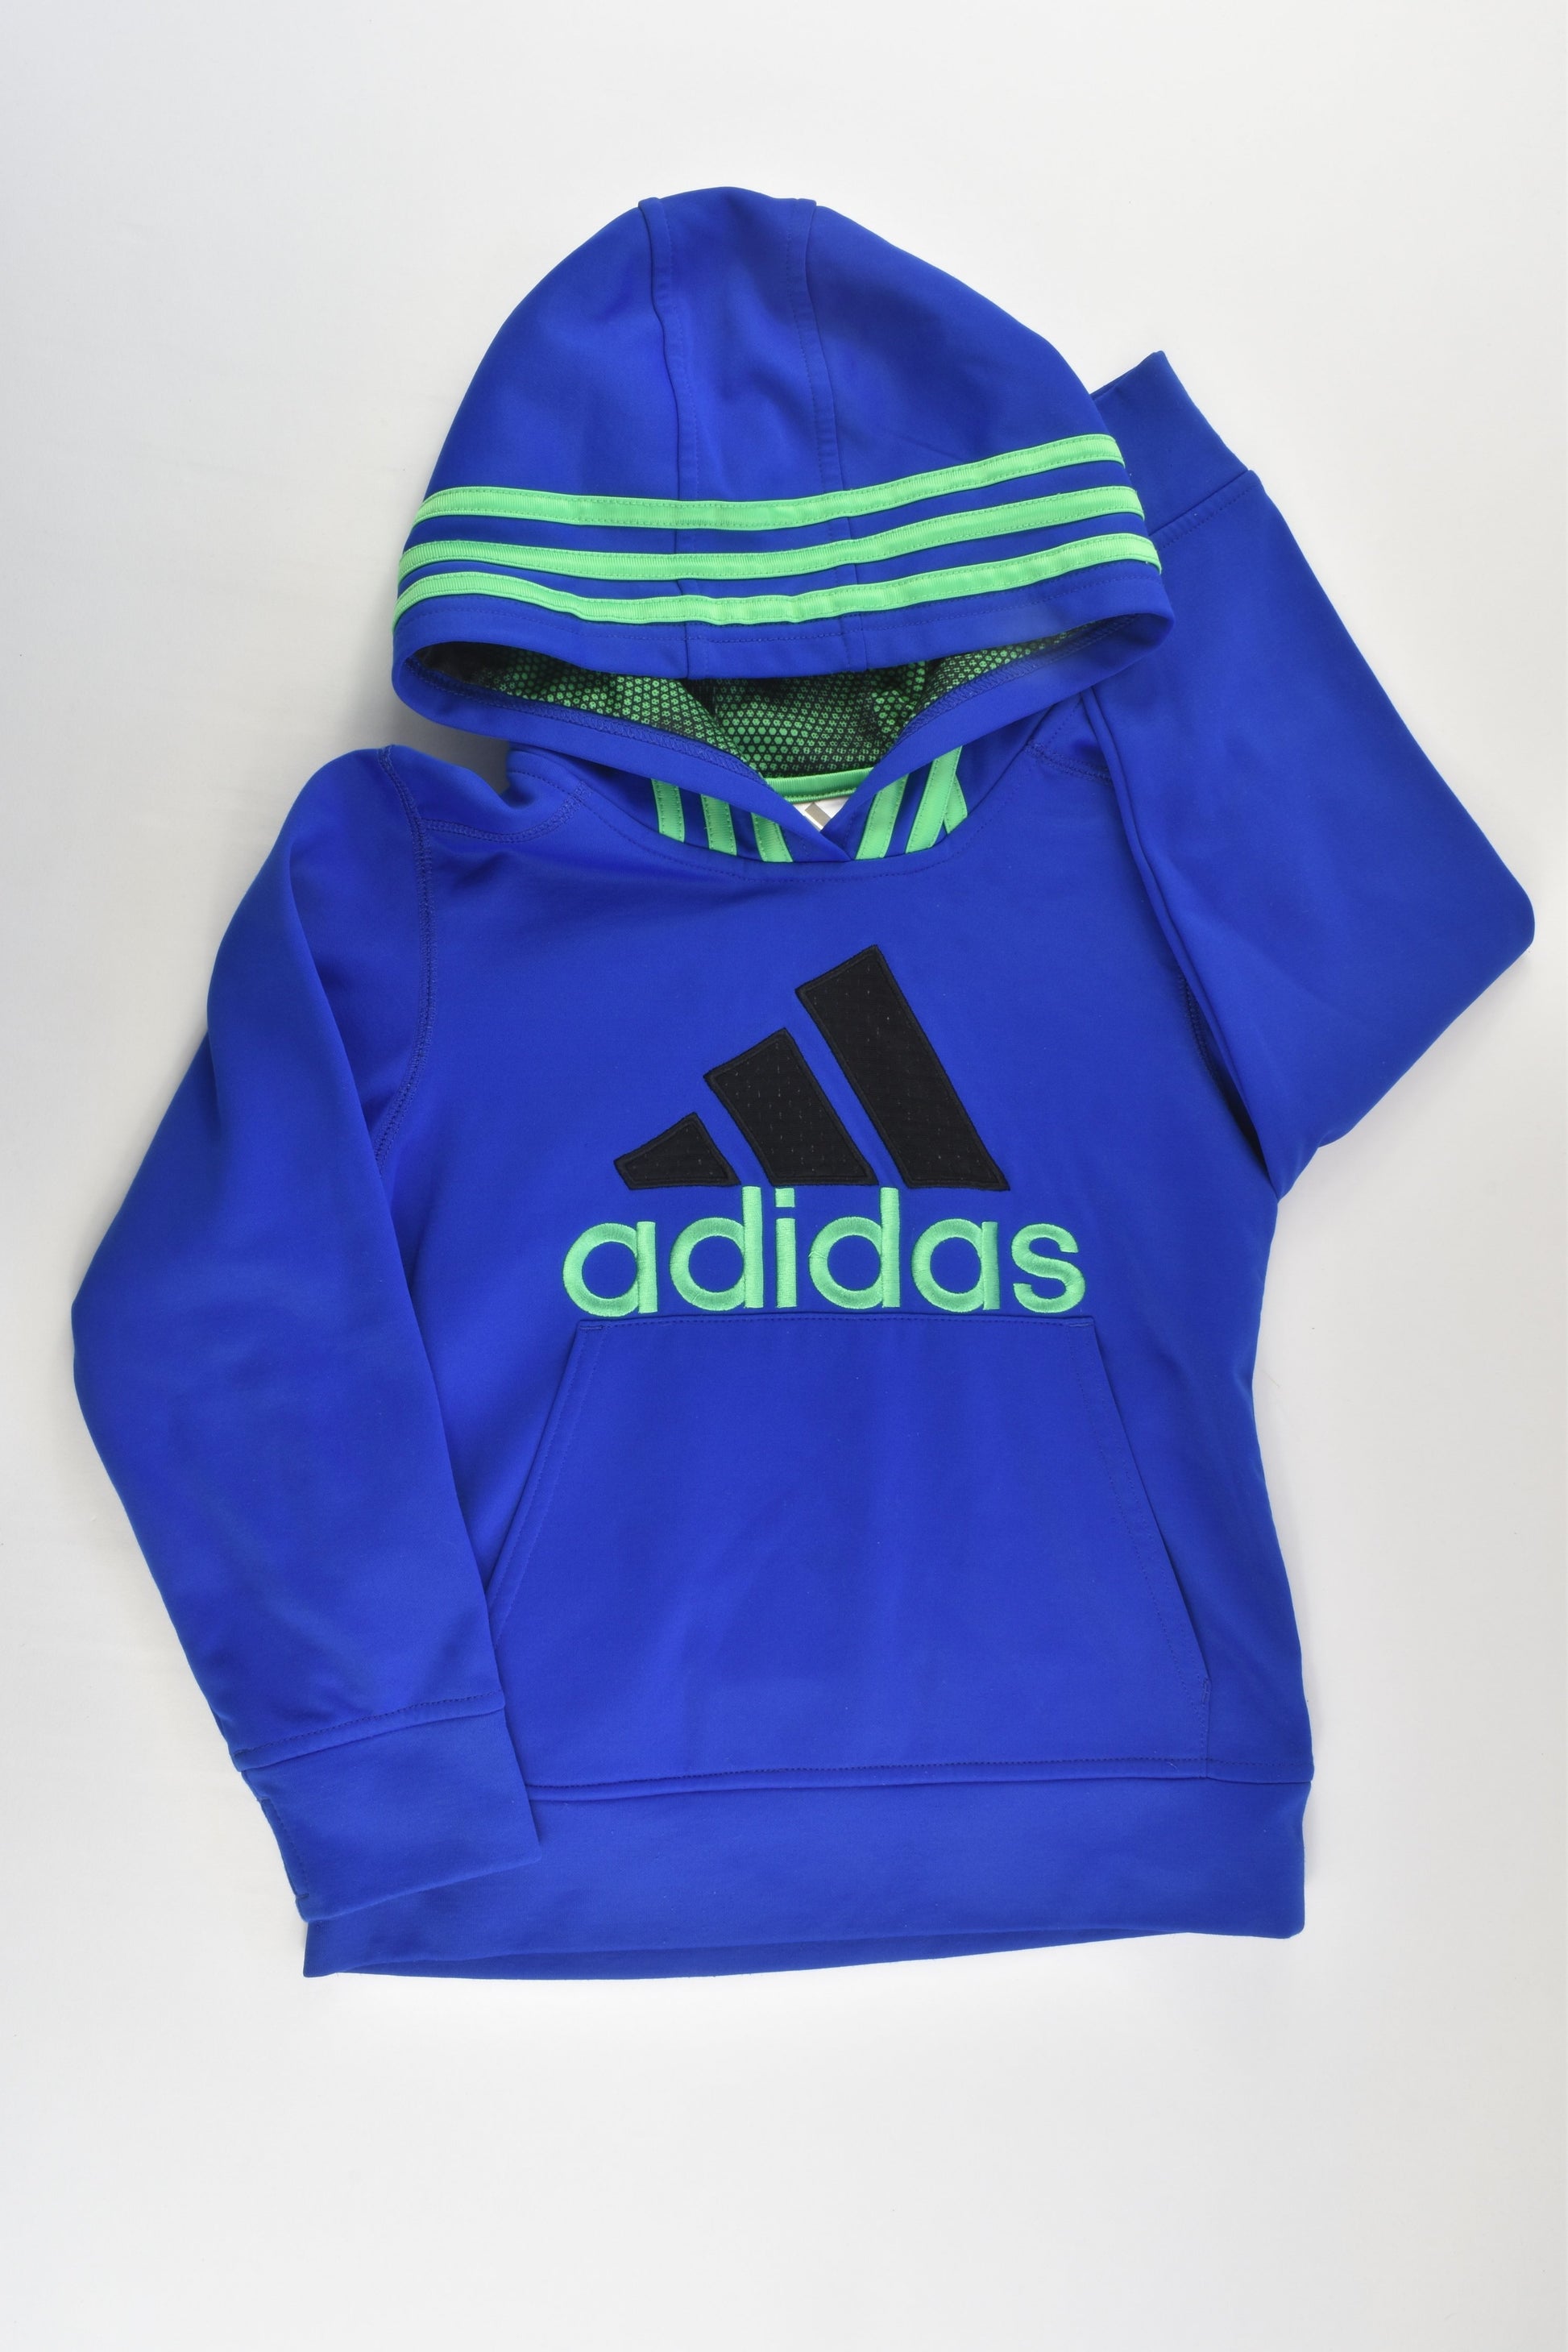 Adidas Size 5 Hooded Jumper